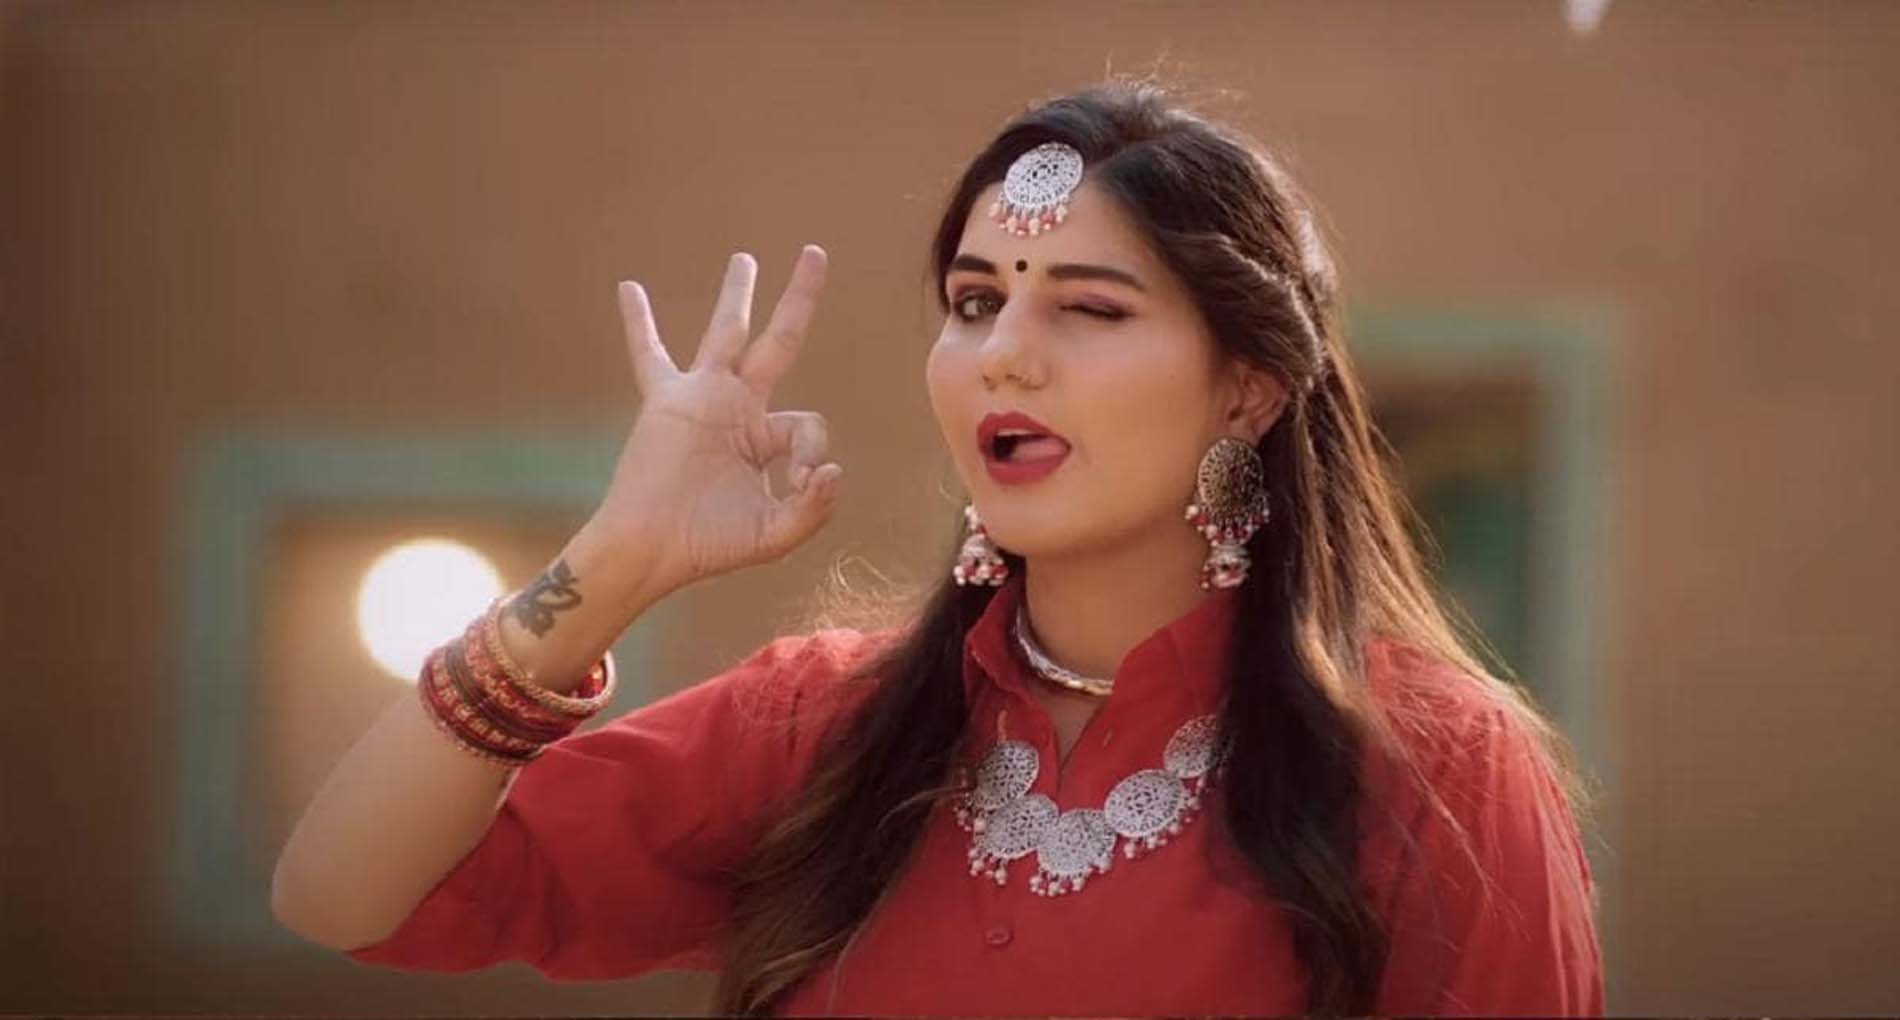 Sapna Choudhary (सपना चौधरी) Most Popular Controversy in Hindi | Due to this song of Sapna Chaudhary, there was a ruckus, under these IPC sections, a case was registered?